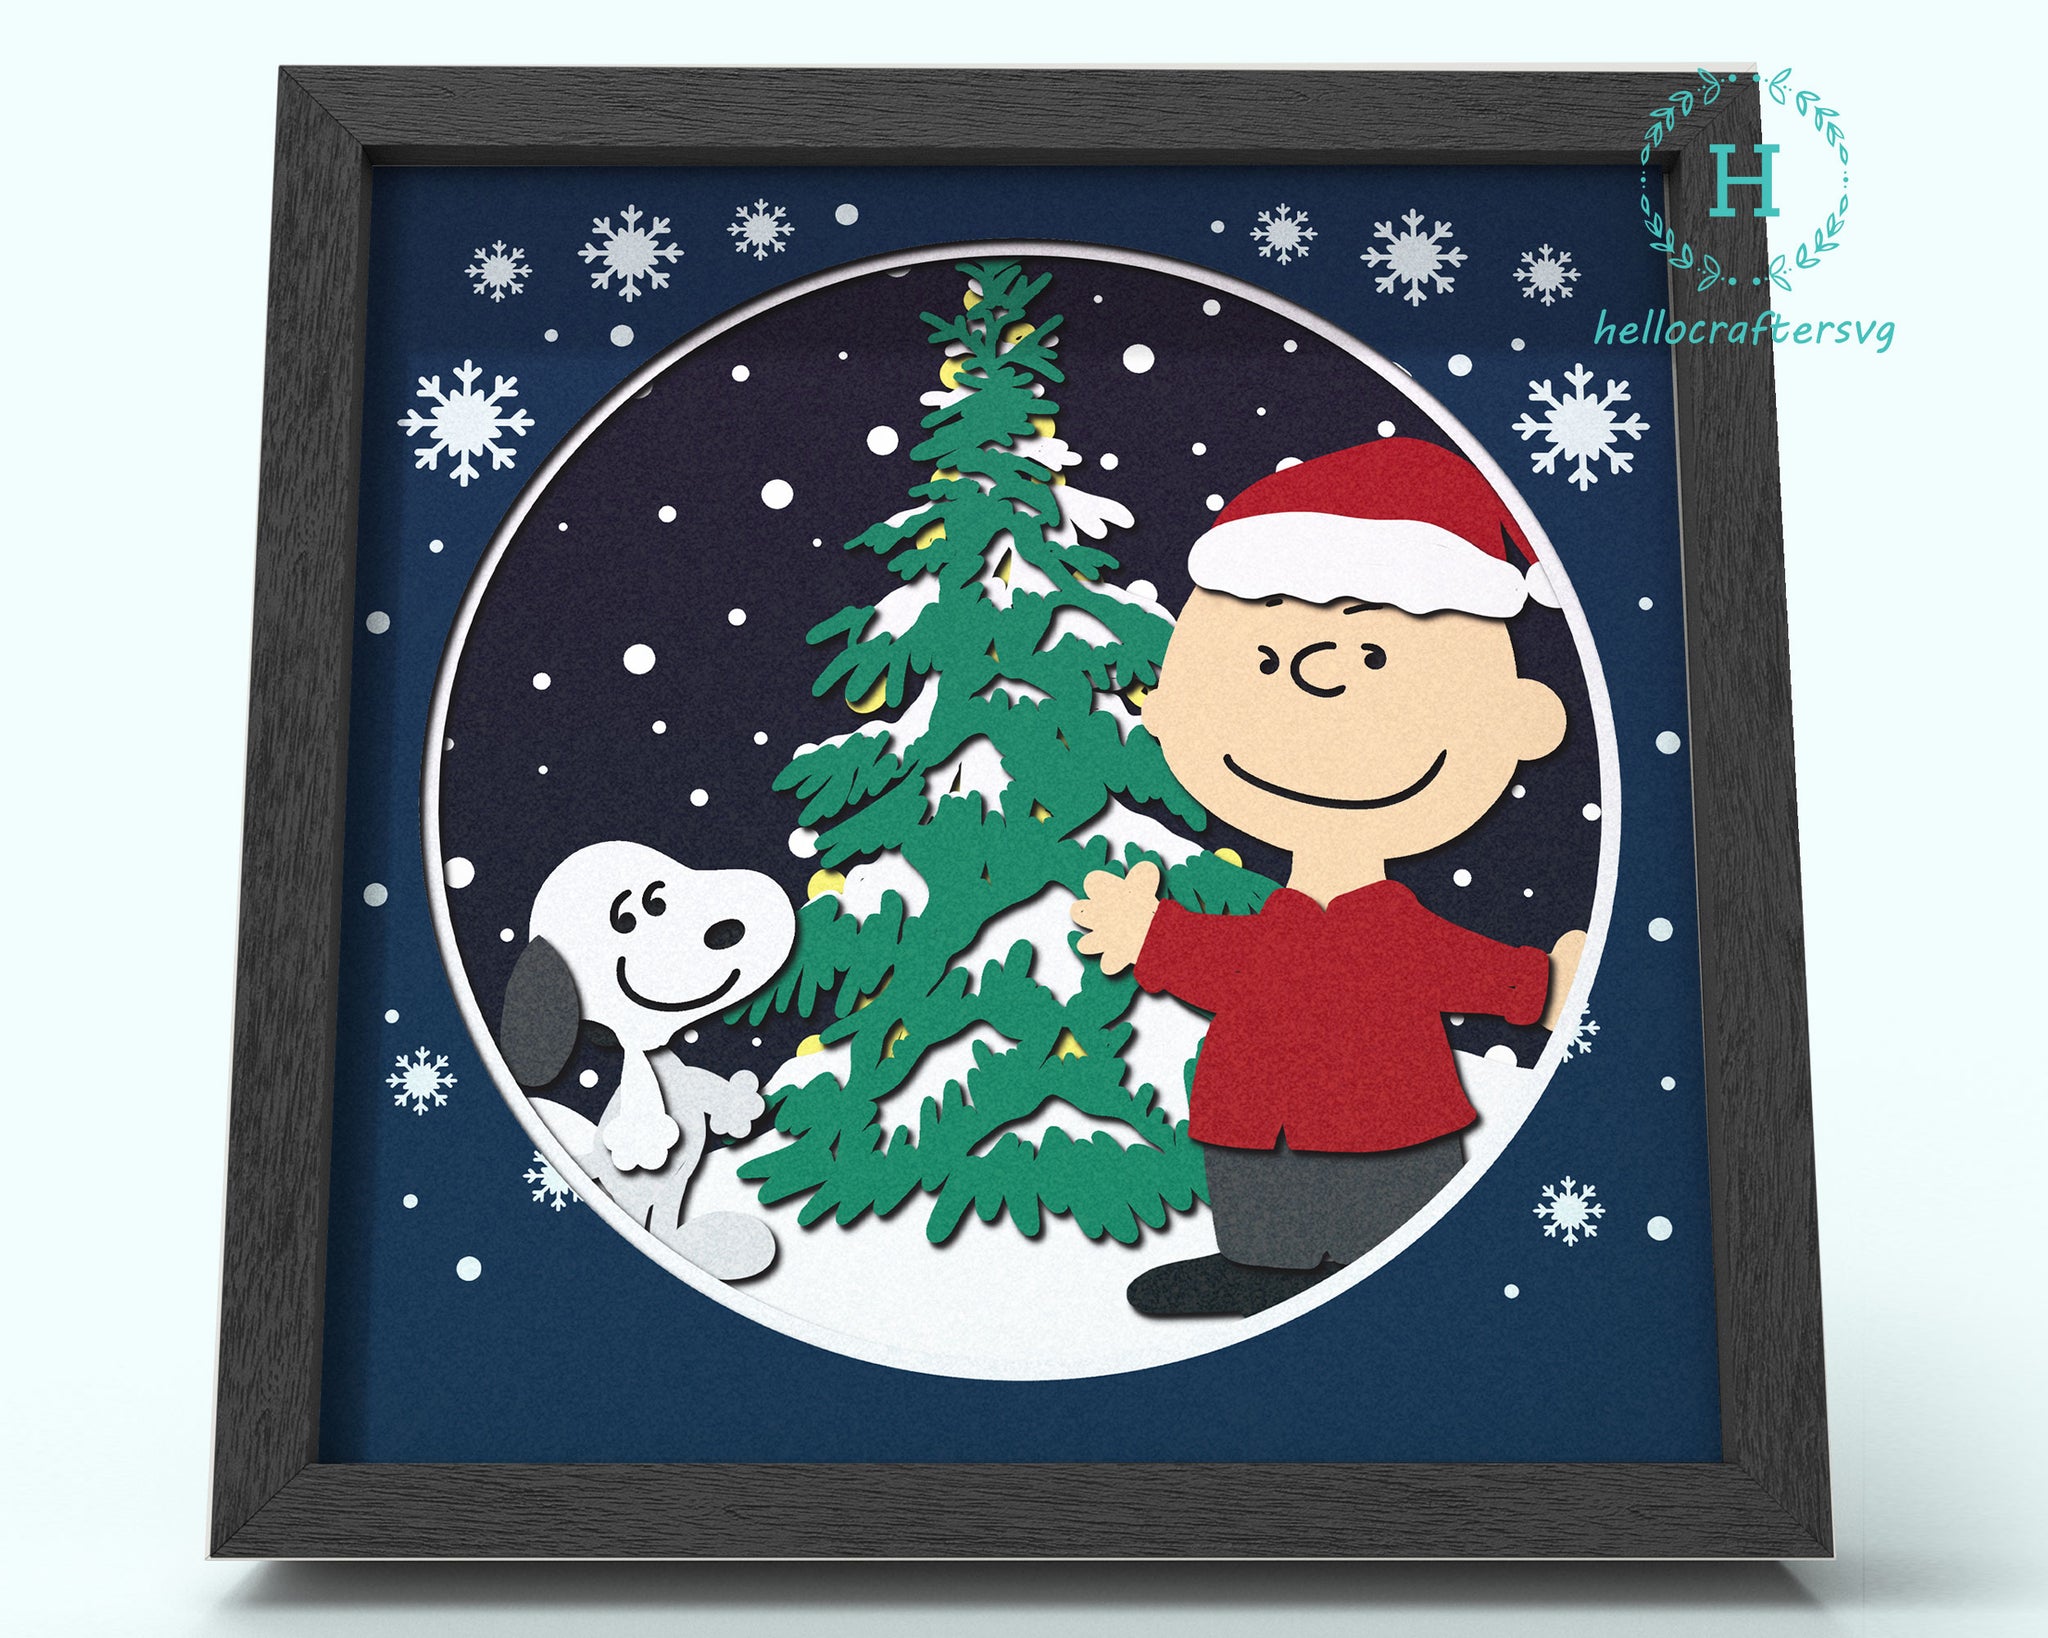 3d CHARLIE BROWN Svg, CHARLIE BROWN Shadow Box Svg - Cricut Files, Cardstock Svg, Silhouette Files - HelloCrafterSvg